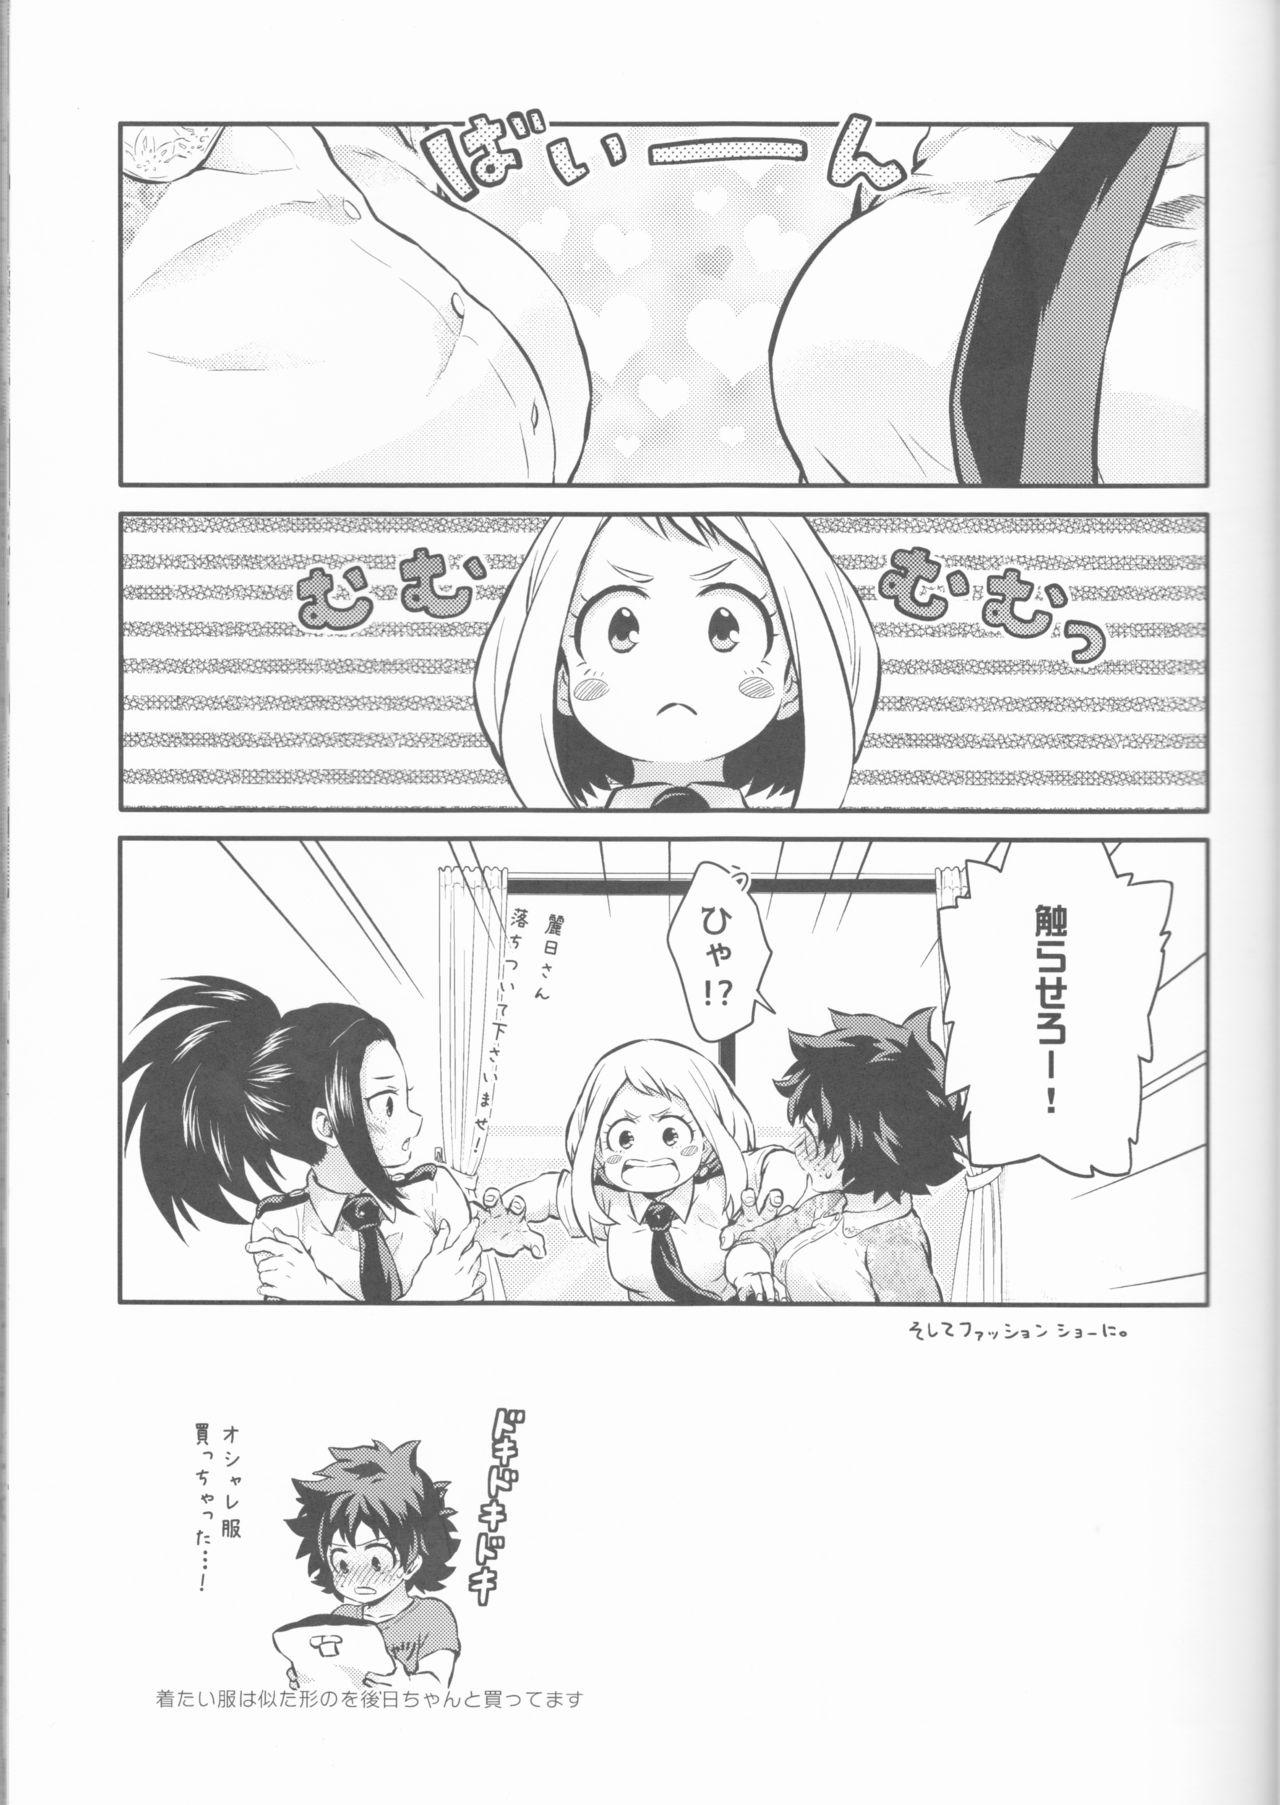 Best Blowjobs Ever Love Me Tender another story - My hero academia Amateur Porn - Page 7